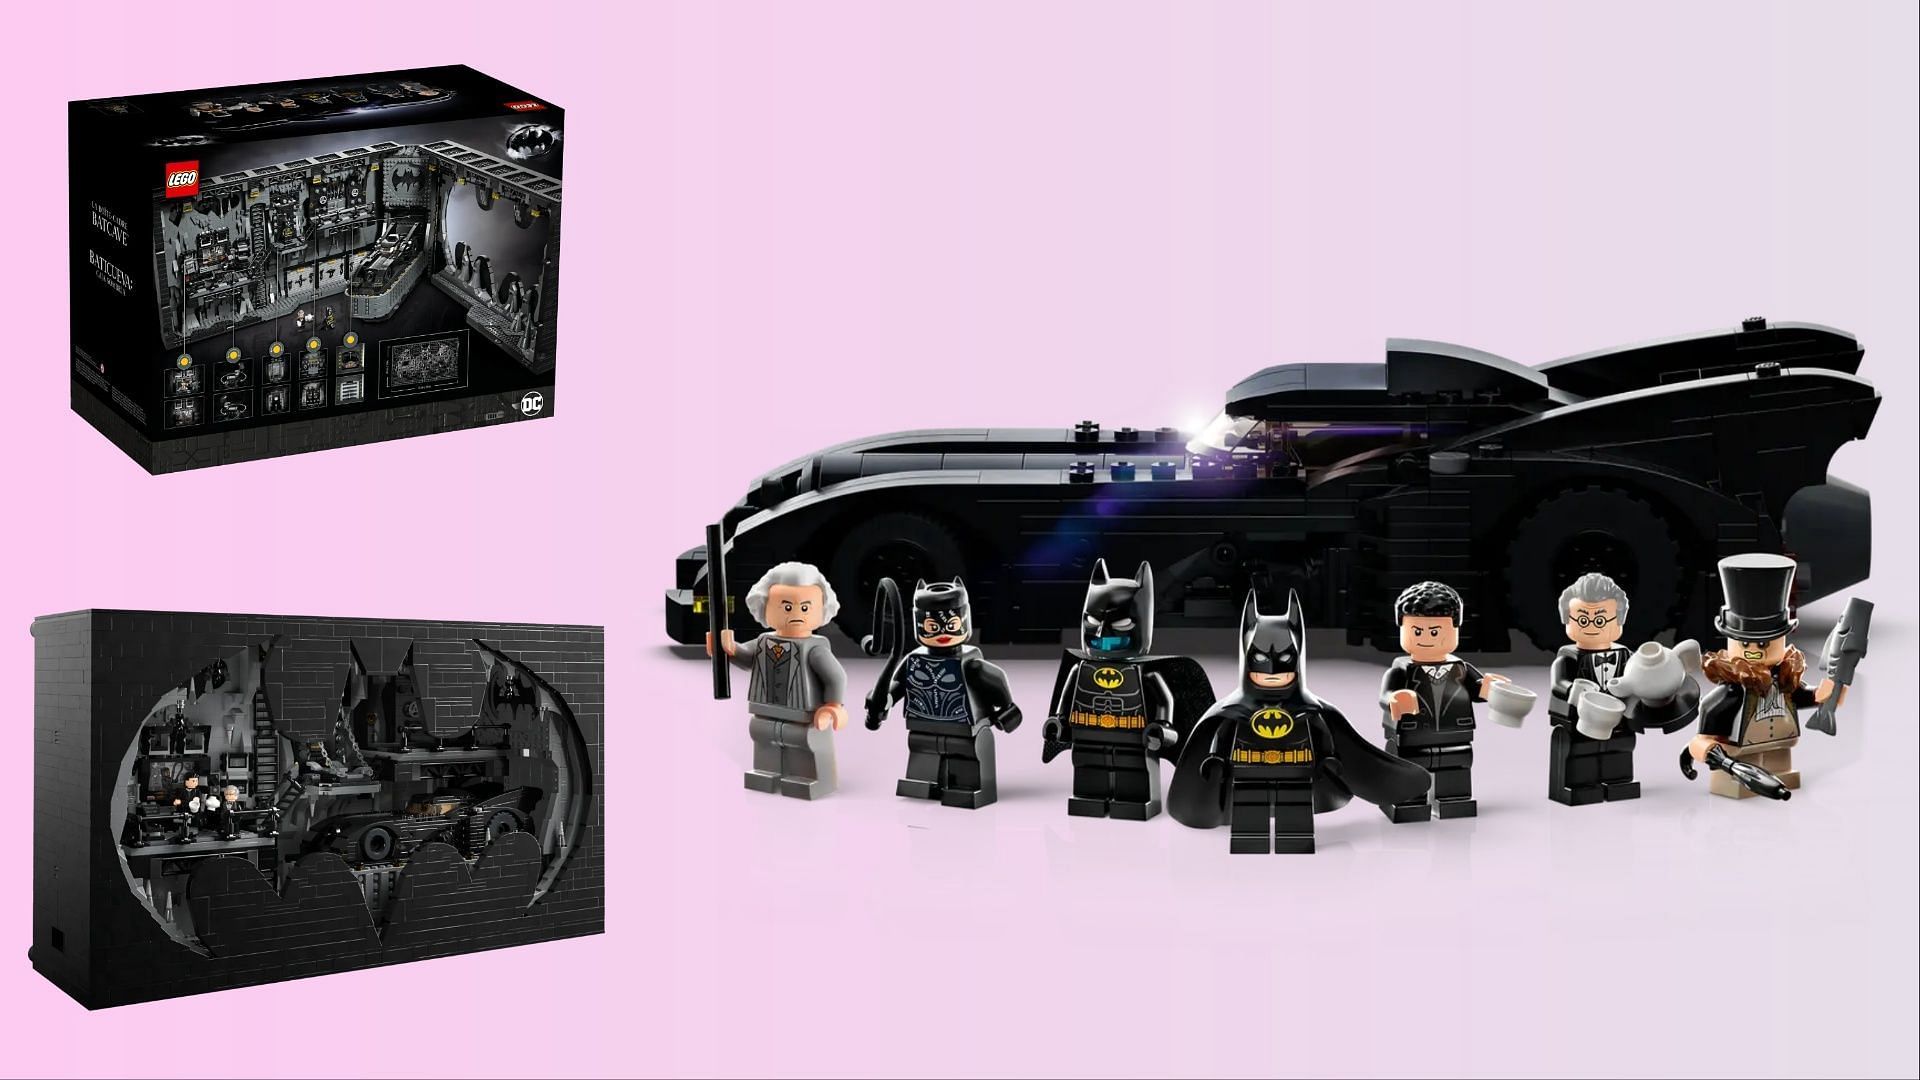 The new LEGO Batman Batcave Shadow Box set measures over 11 in. high, 20 in. wide, and 5.5 in. deep (Image via LEGO)